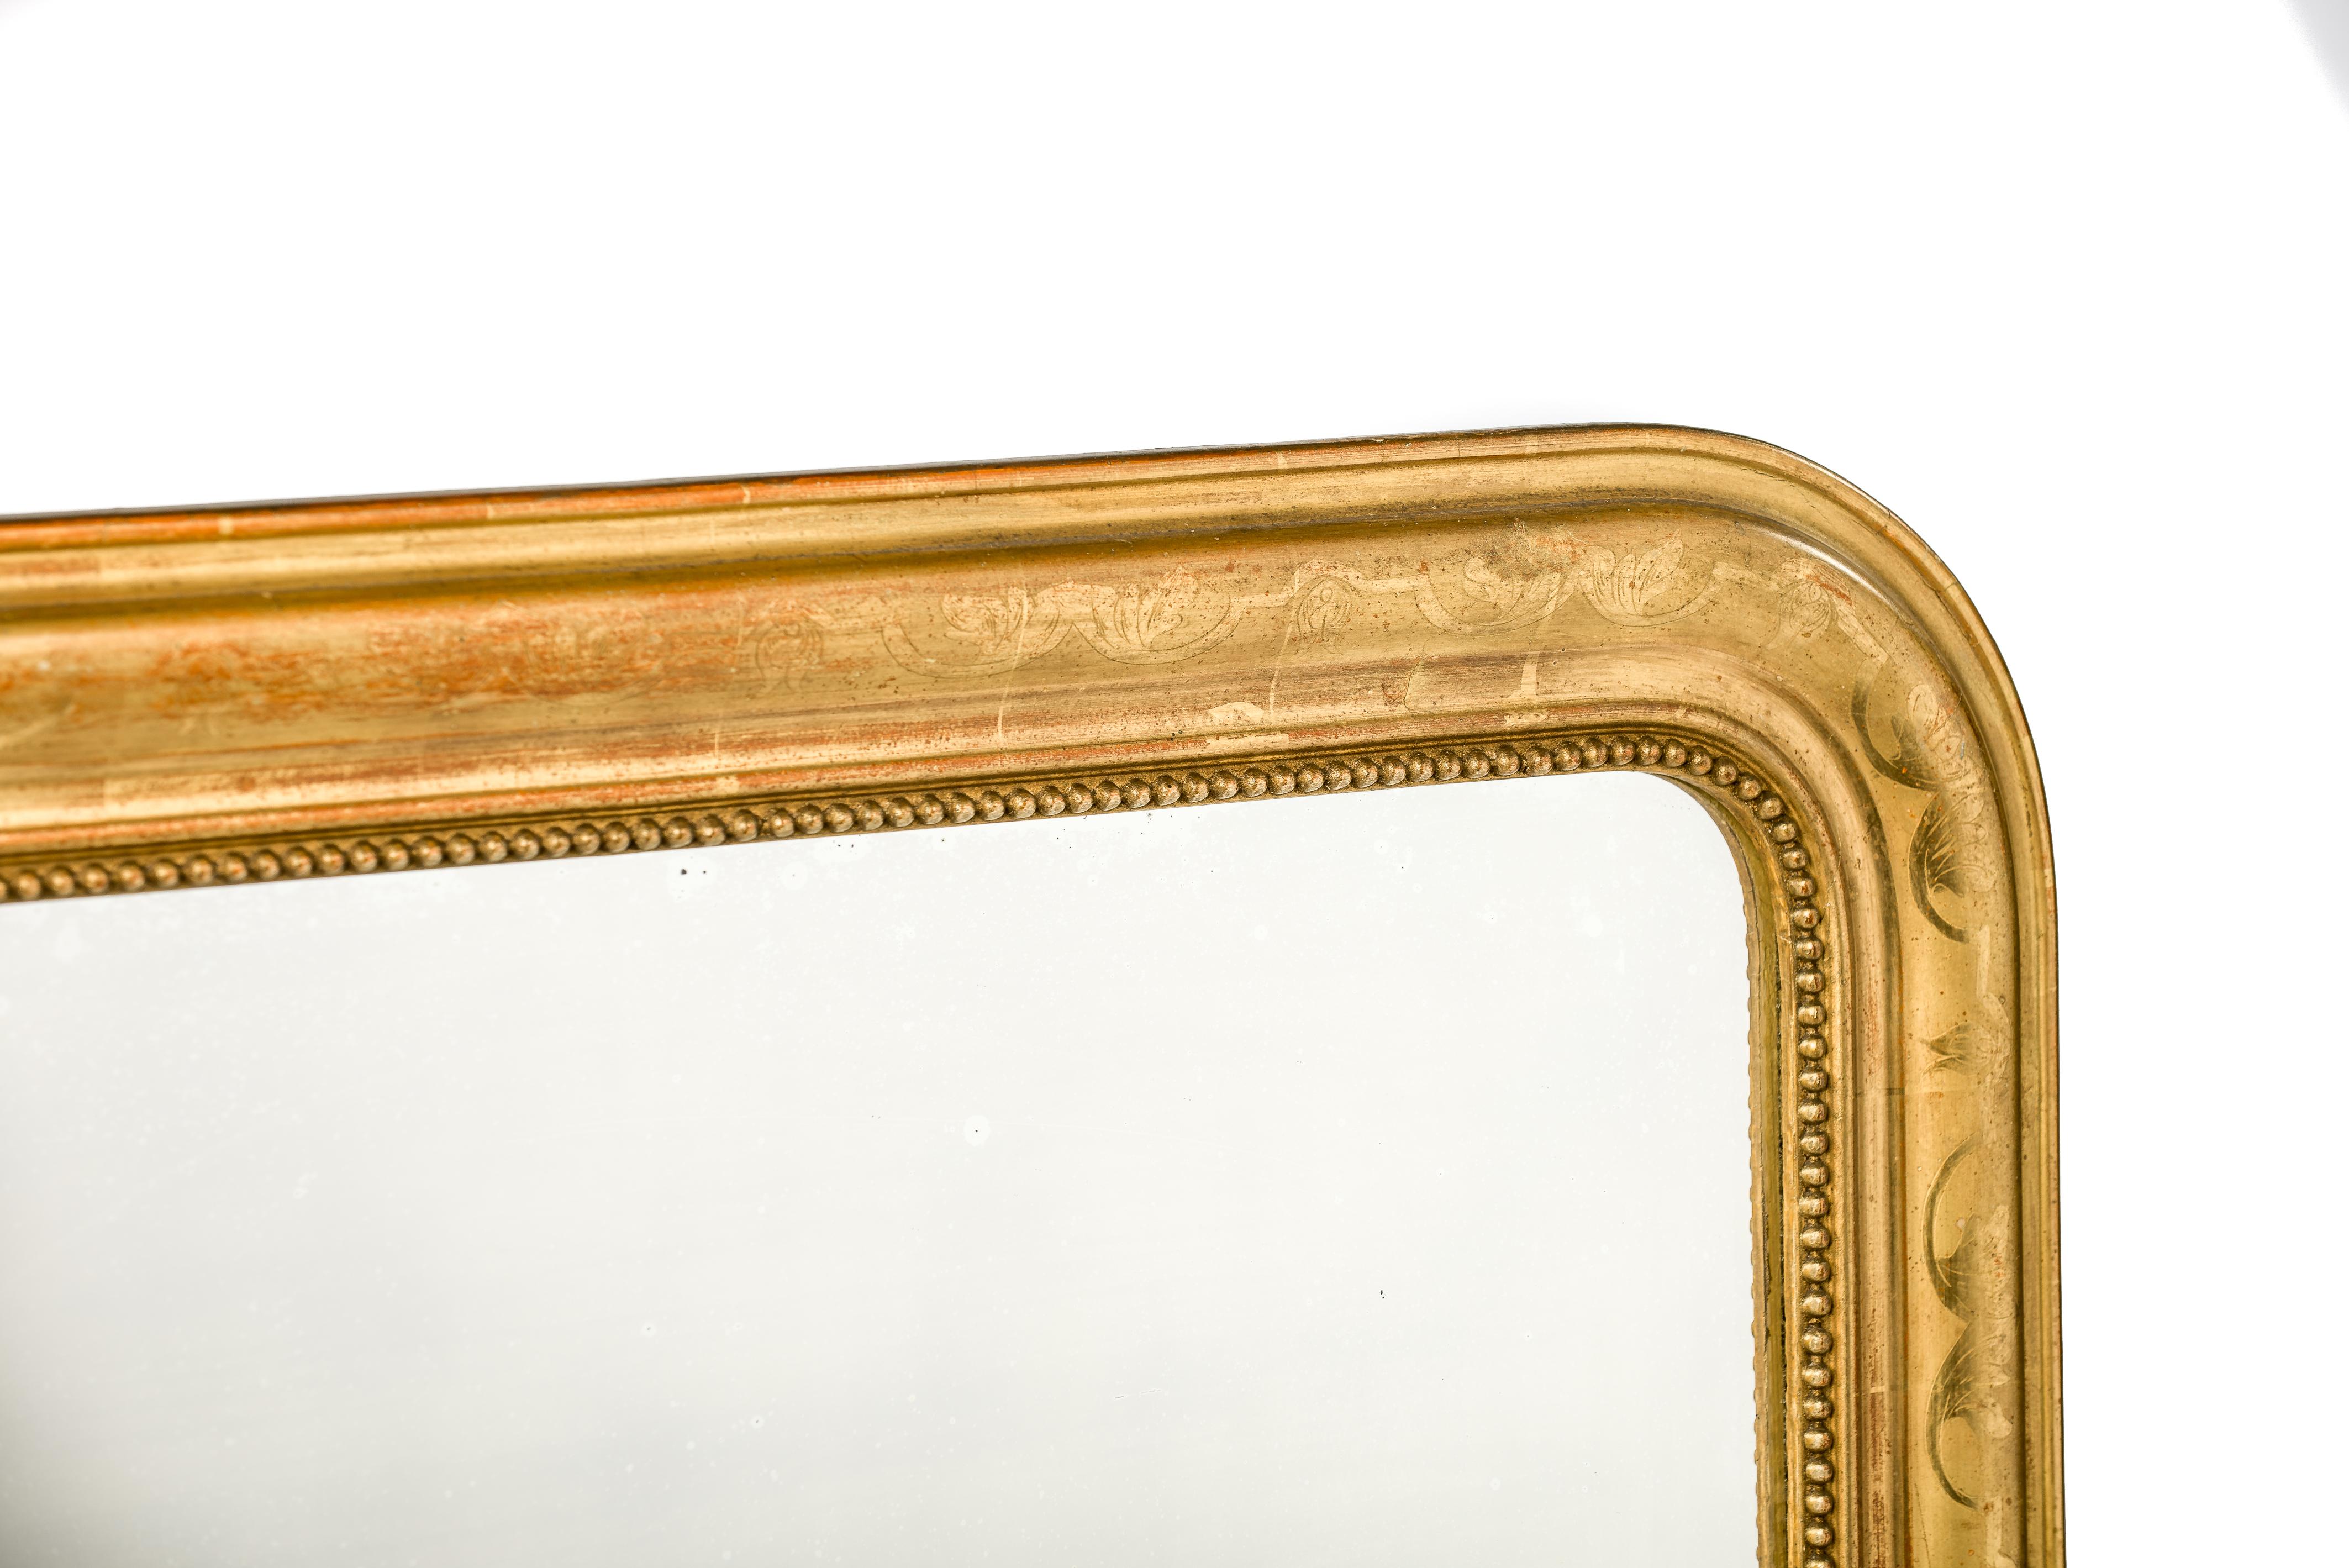 This is a beautiful completely gold leaf gilt Louis Philippe mirror. It features the upper rounded corners typical for Louis Philippe mirrors. The frame is decorated with a floral engraving on the most elevated part of the frame. A pearl beading